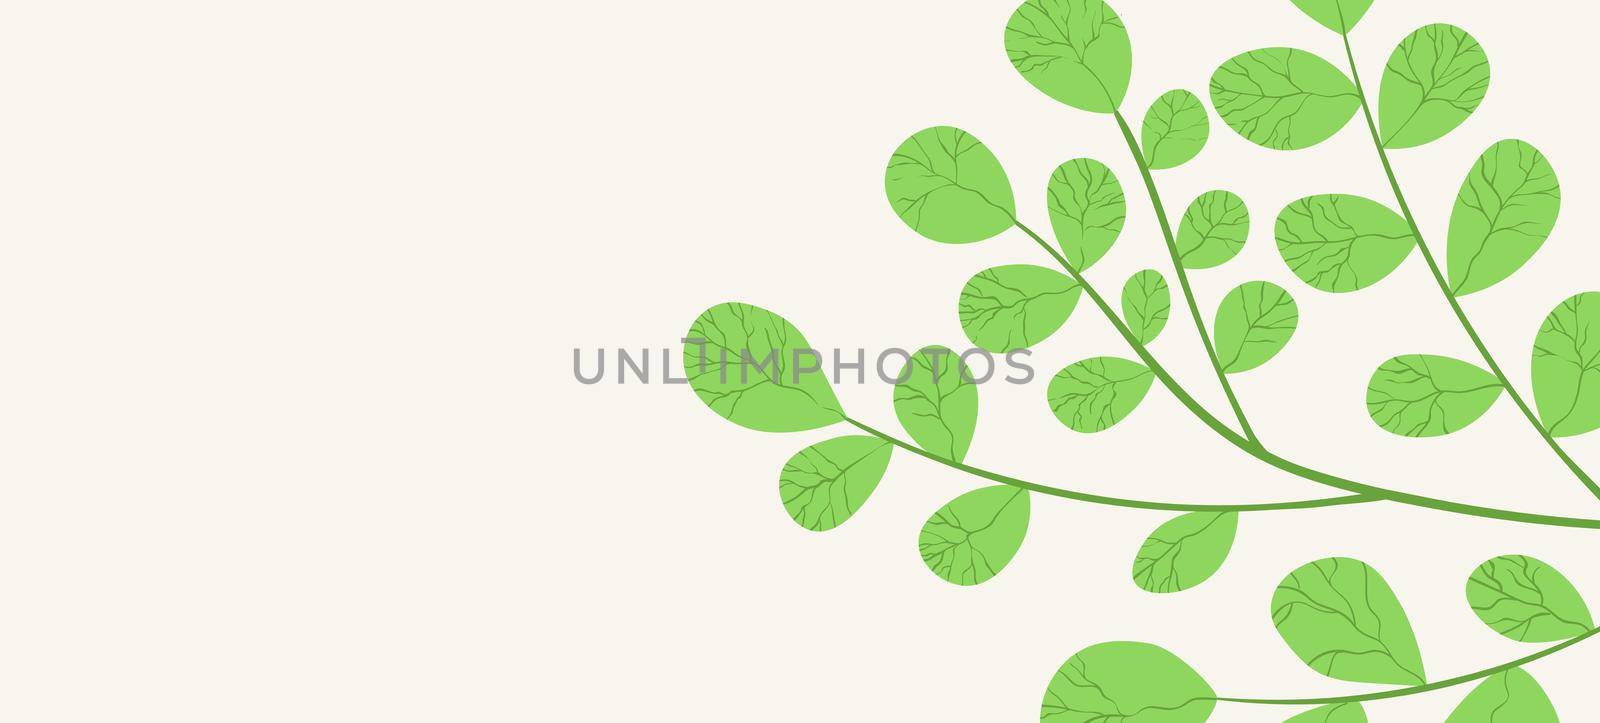 Floral web banner with drawn color exotic monstera leaves. Nature concept design. Modern floral compositions with summer branches. Vector illustration on the theme of ecology, natura, environment by allaku